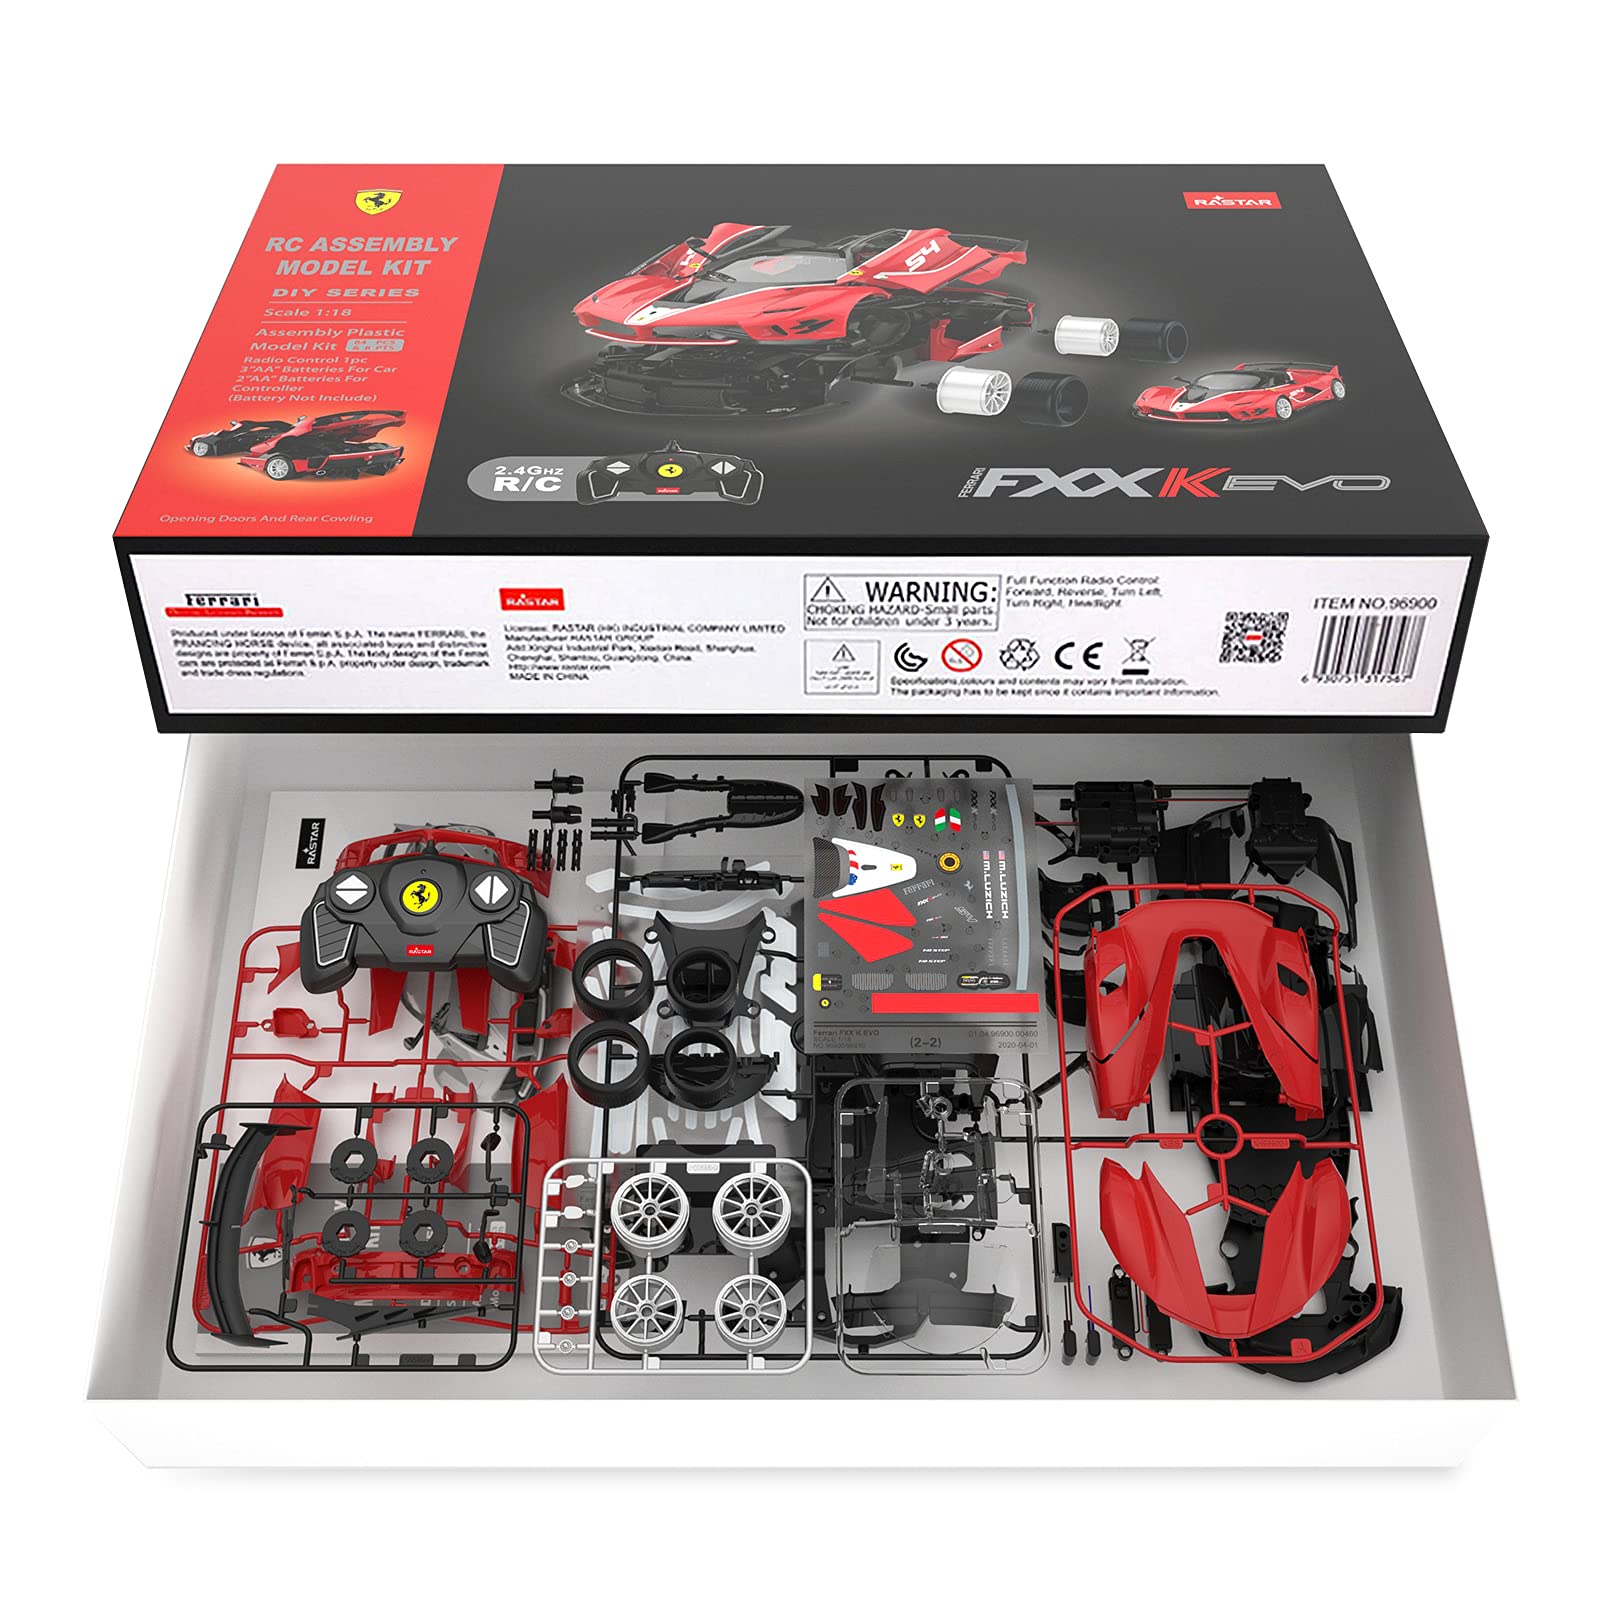 RASTAR RC Car Kits to Build, 1/18 Ferrari FXX-K EVO Supercar Assembly Building Kit with Remote Controller, 92PCs, STEM Kits for Kids and Adult, Ages 8+